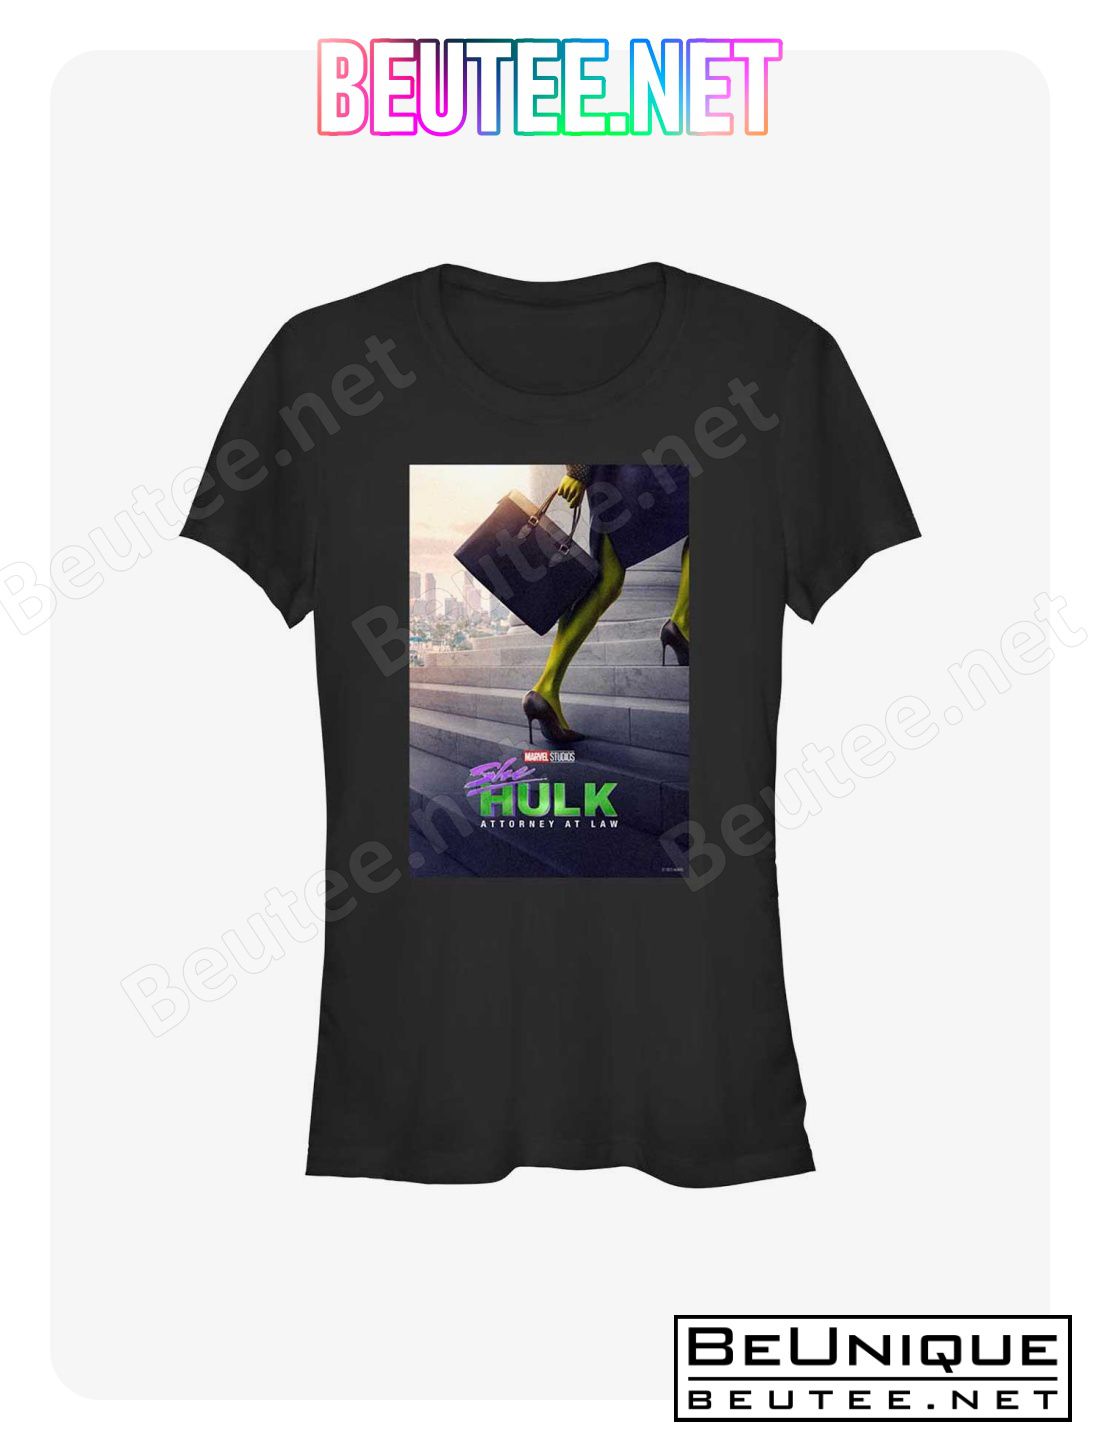 Marvel She-Hulk Attorney At Law Poster T-Shirt